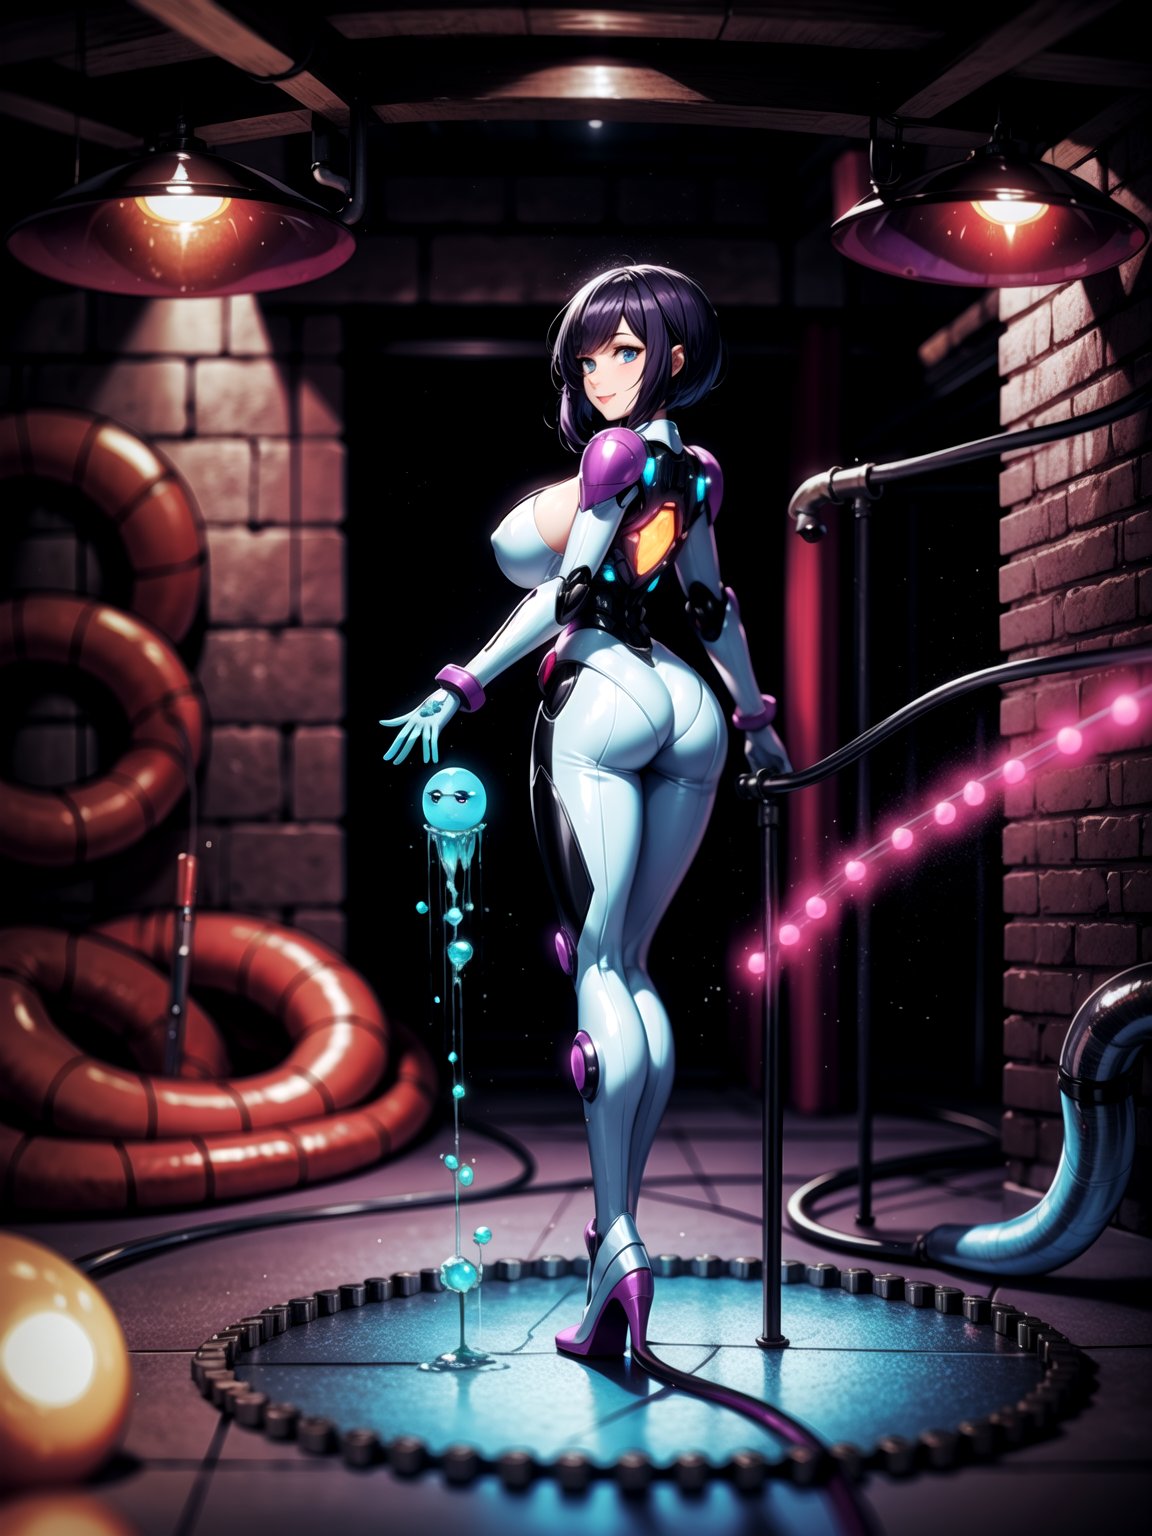 {((1 woman))}, only she is {((white mecha suit with black parts, gears, cybernetic parts)), only she has ((giant breasts)), ((extroverted pose from the front, short purple hair, blue eyes)), staring at the viewer, smiling, ((alien cave, goo on the walls, equipment with pipes and lights, several slimy monsters, back, background, well-lit area))}, ((full body):1.5), (( Super Metroid)), 16k, best quality, best resolution, best sharpness,